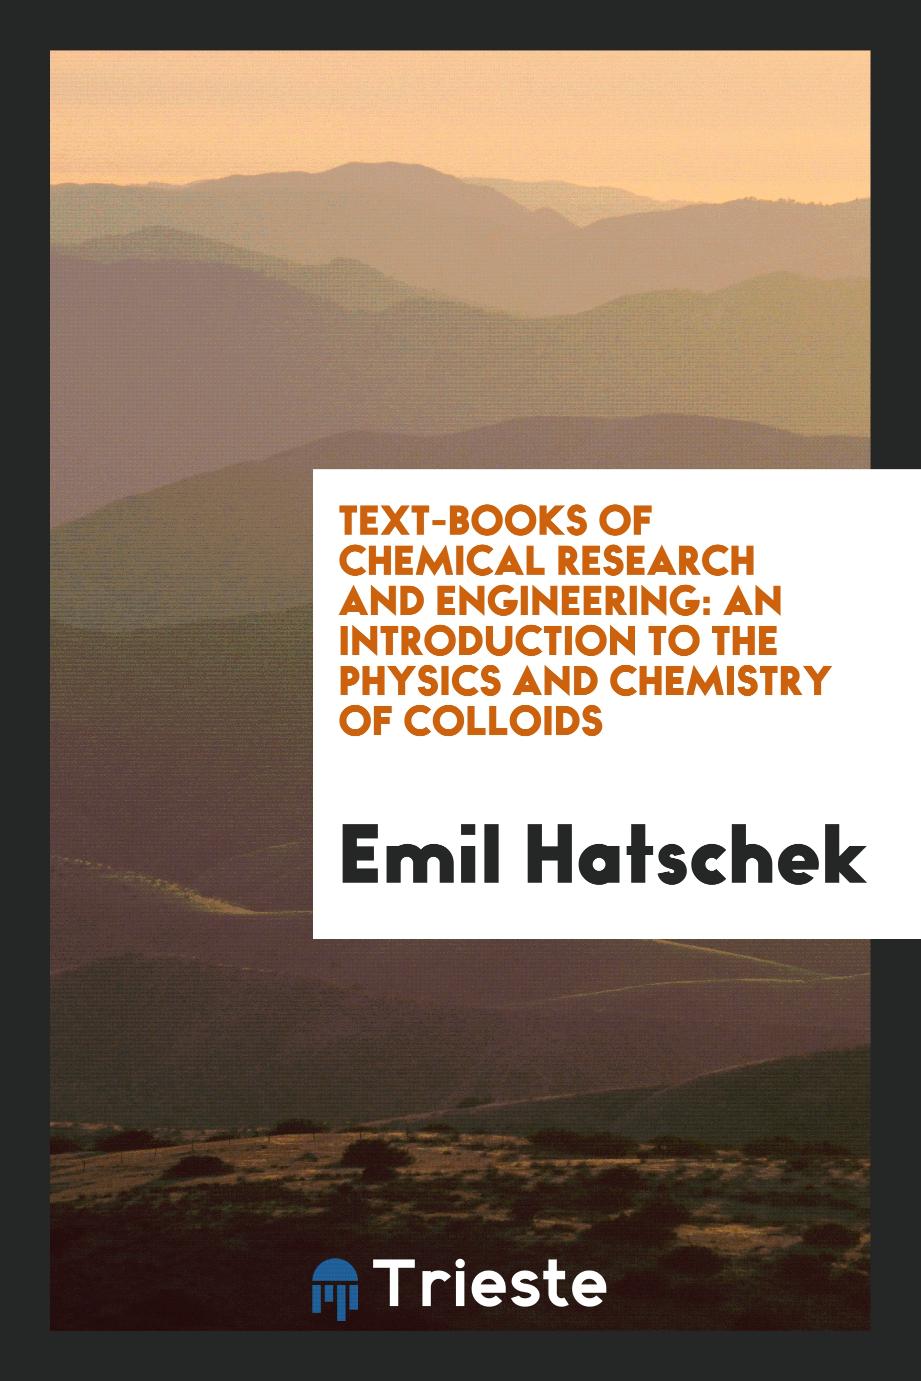 Text-Books of Chemical Research and Engineering: An Introduction to the Physics and Chemistry of Colloids